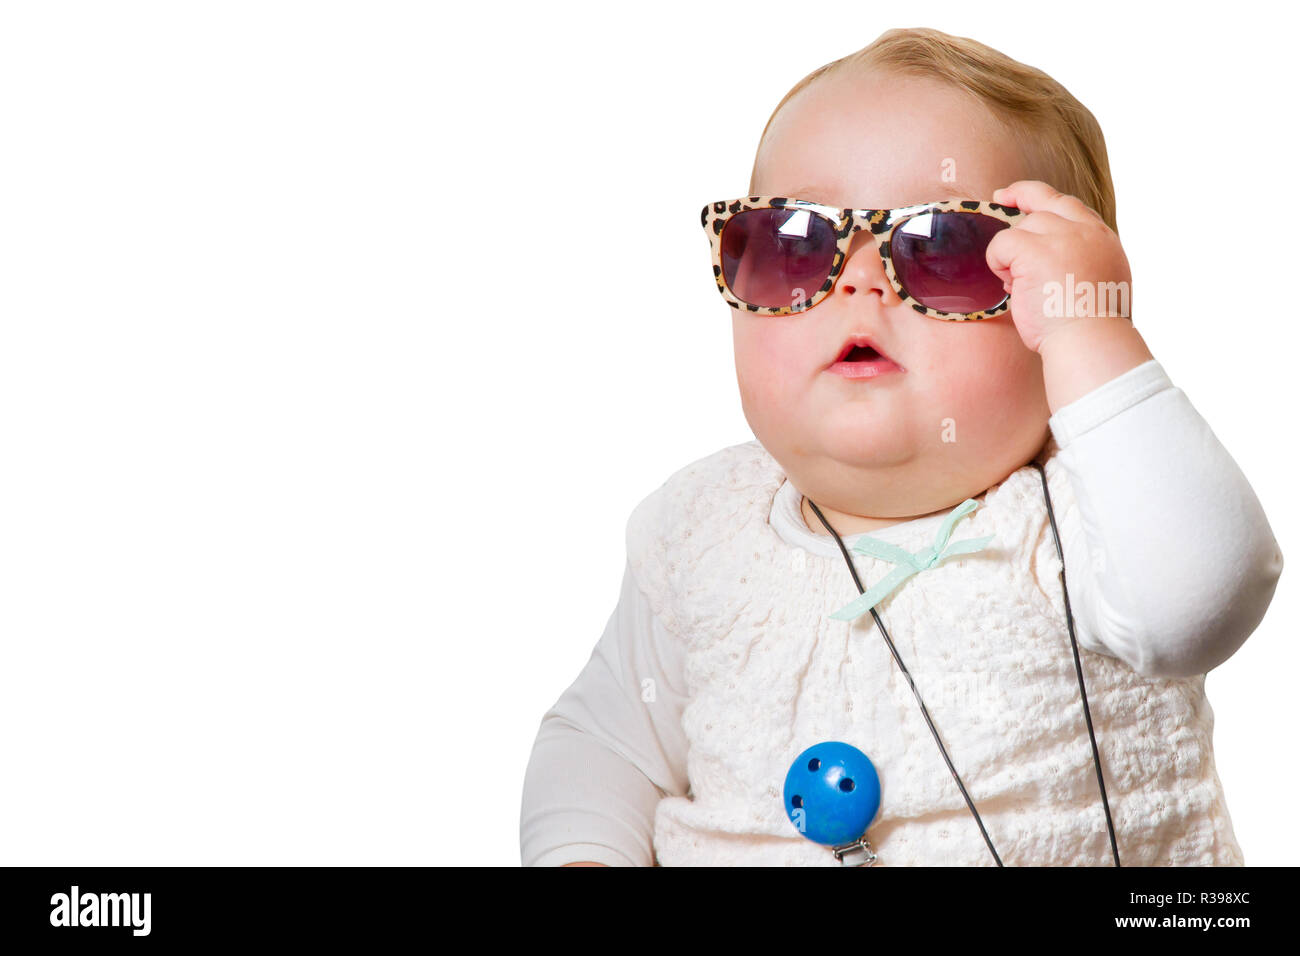 baby with sunglasses,released on a white background Stock Photo